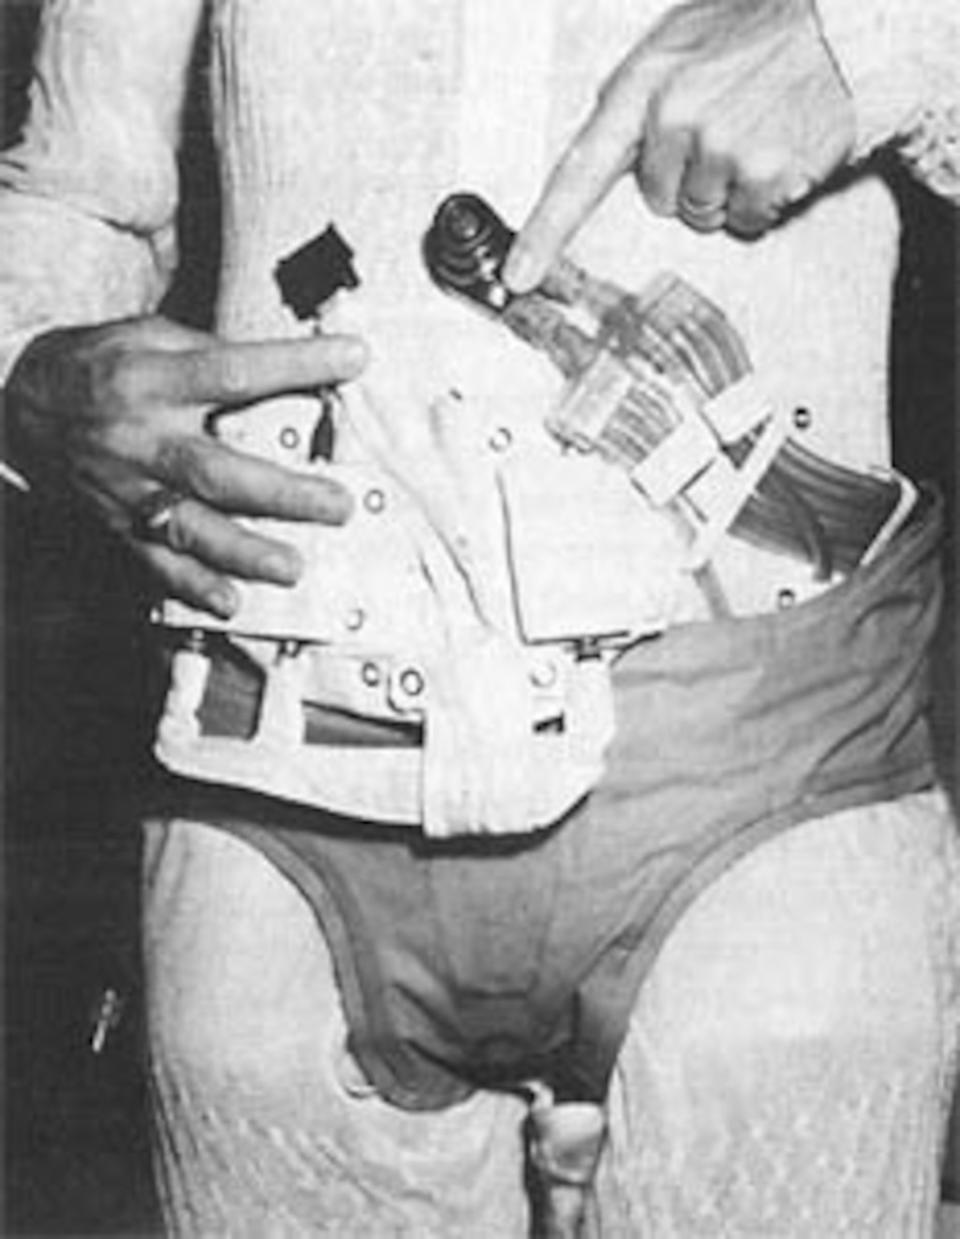 An Apollo-era urine collection and transfer assembly worn over the liquid cooling garment. <cite>NASA</cite>